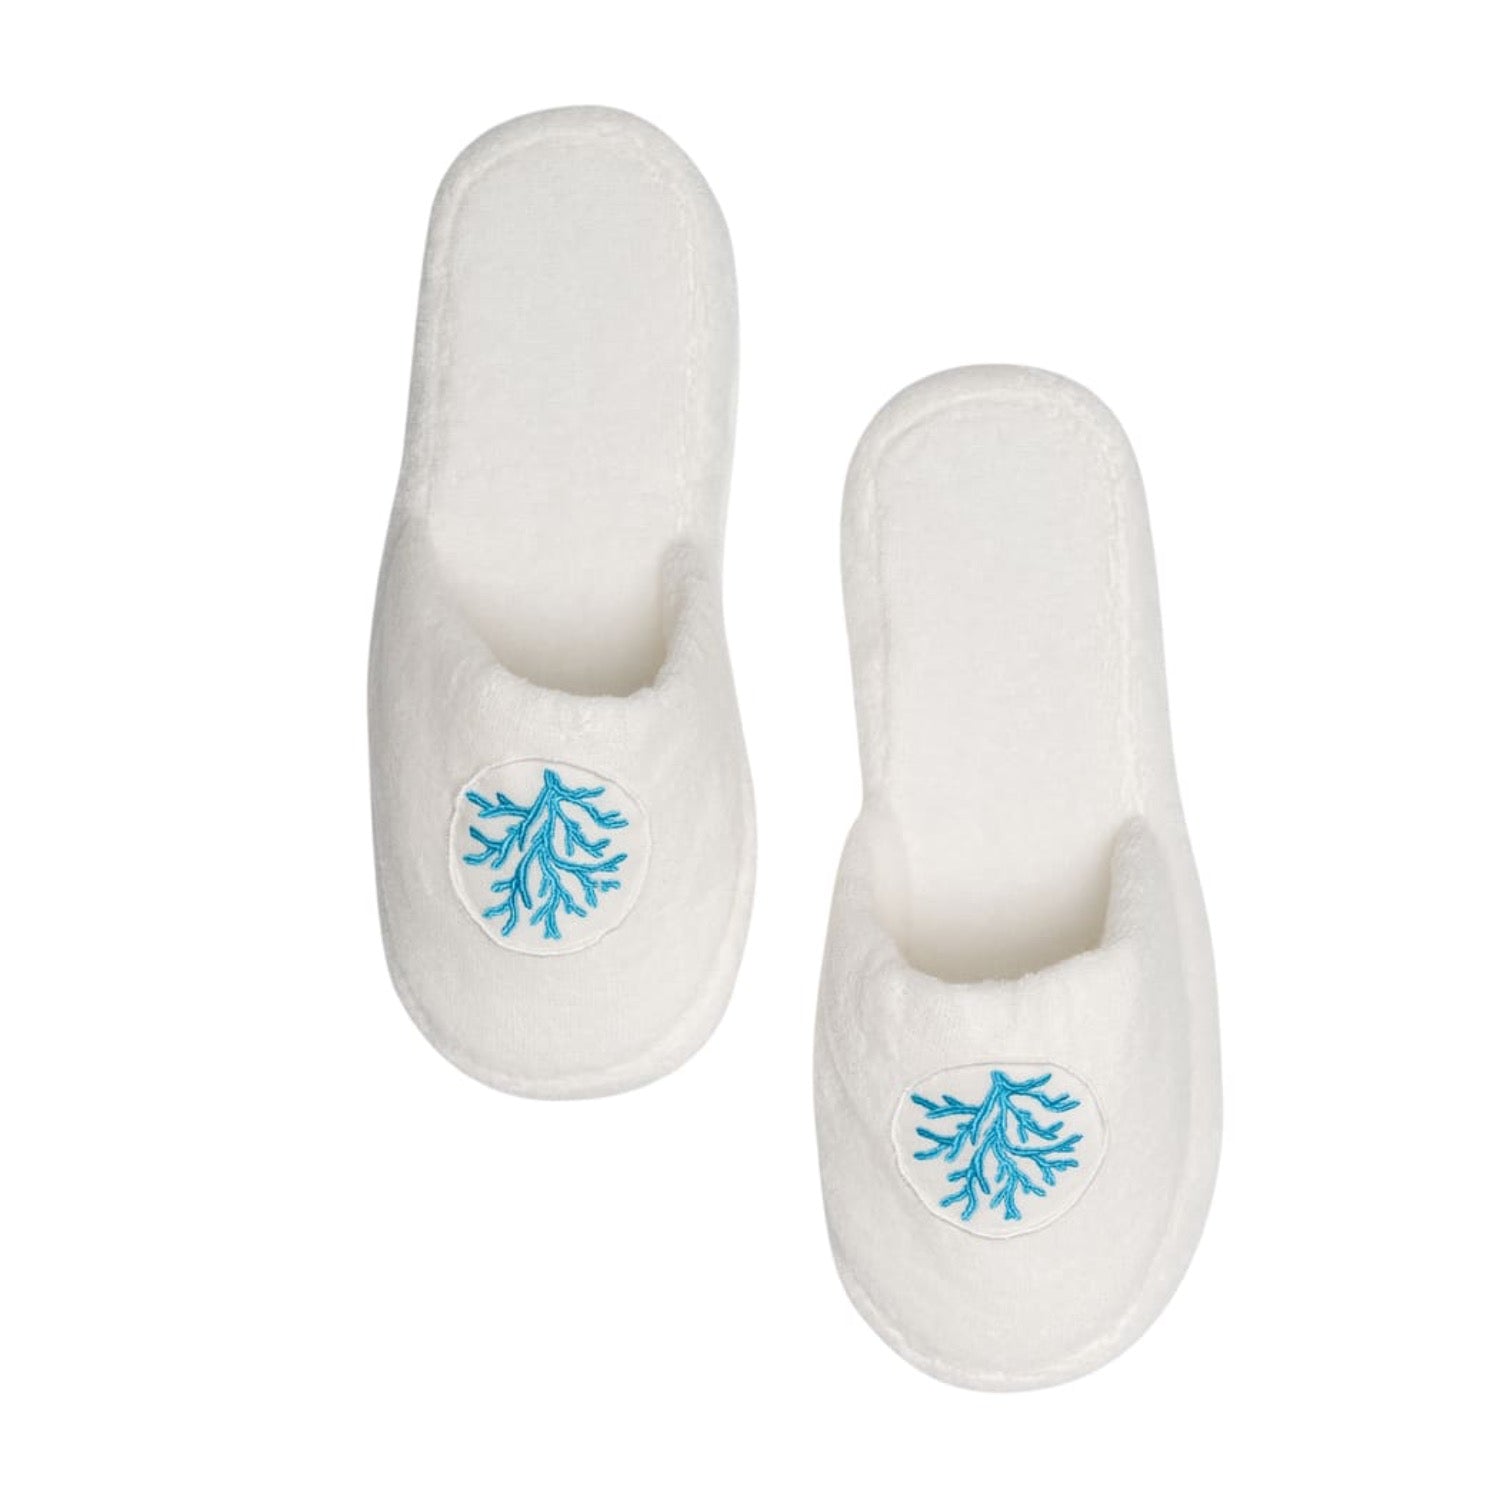 Turqoise Coral Embroidery Cotton Bath Slippers